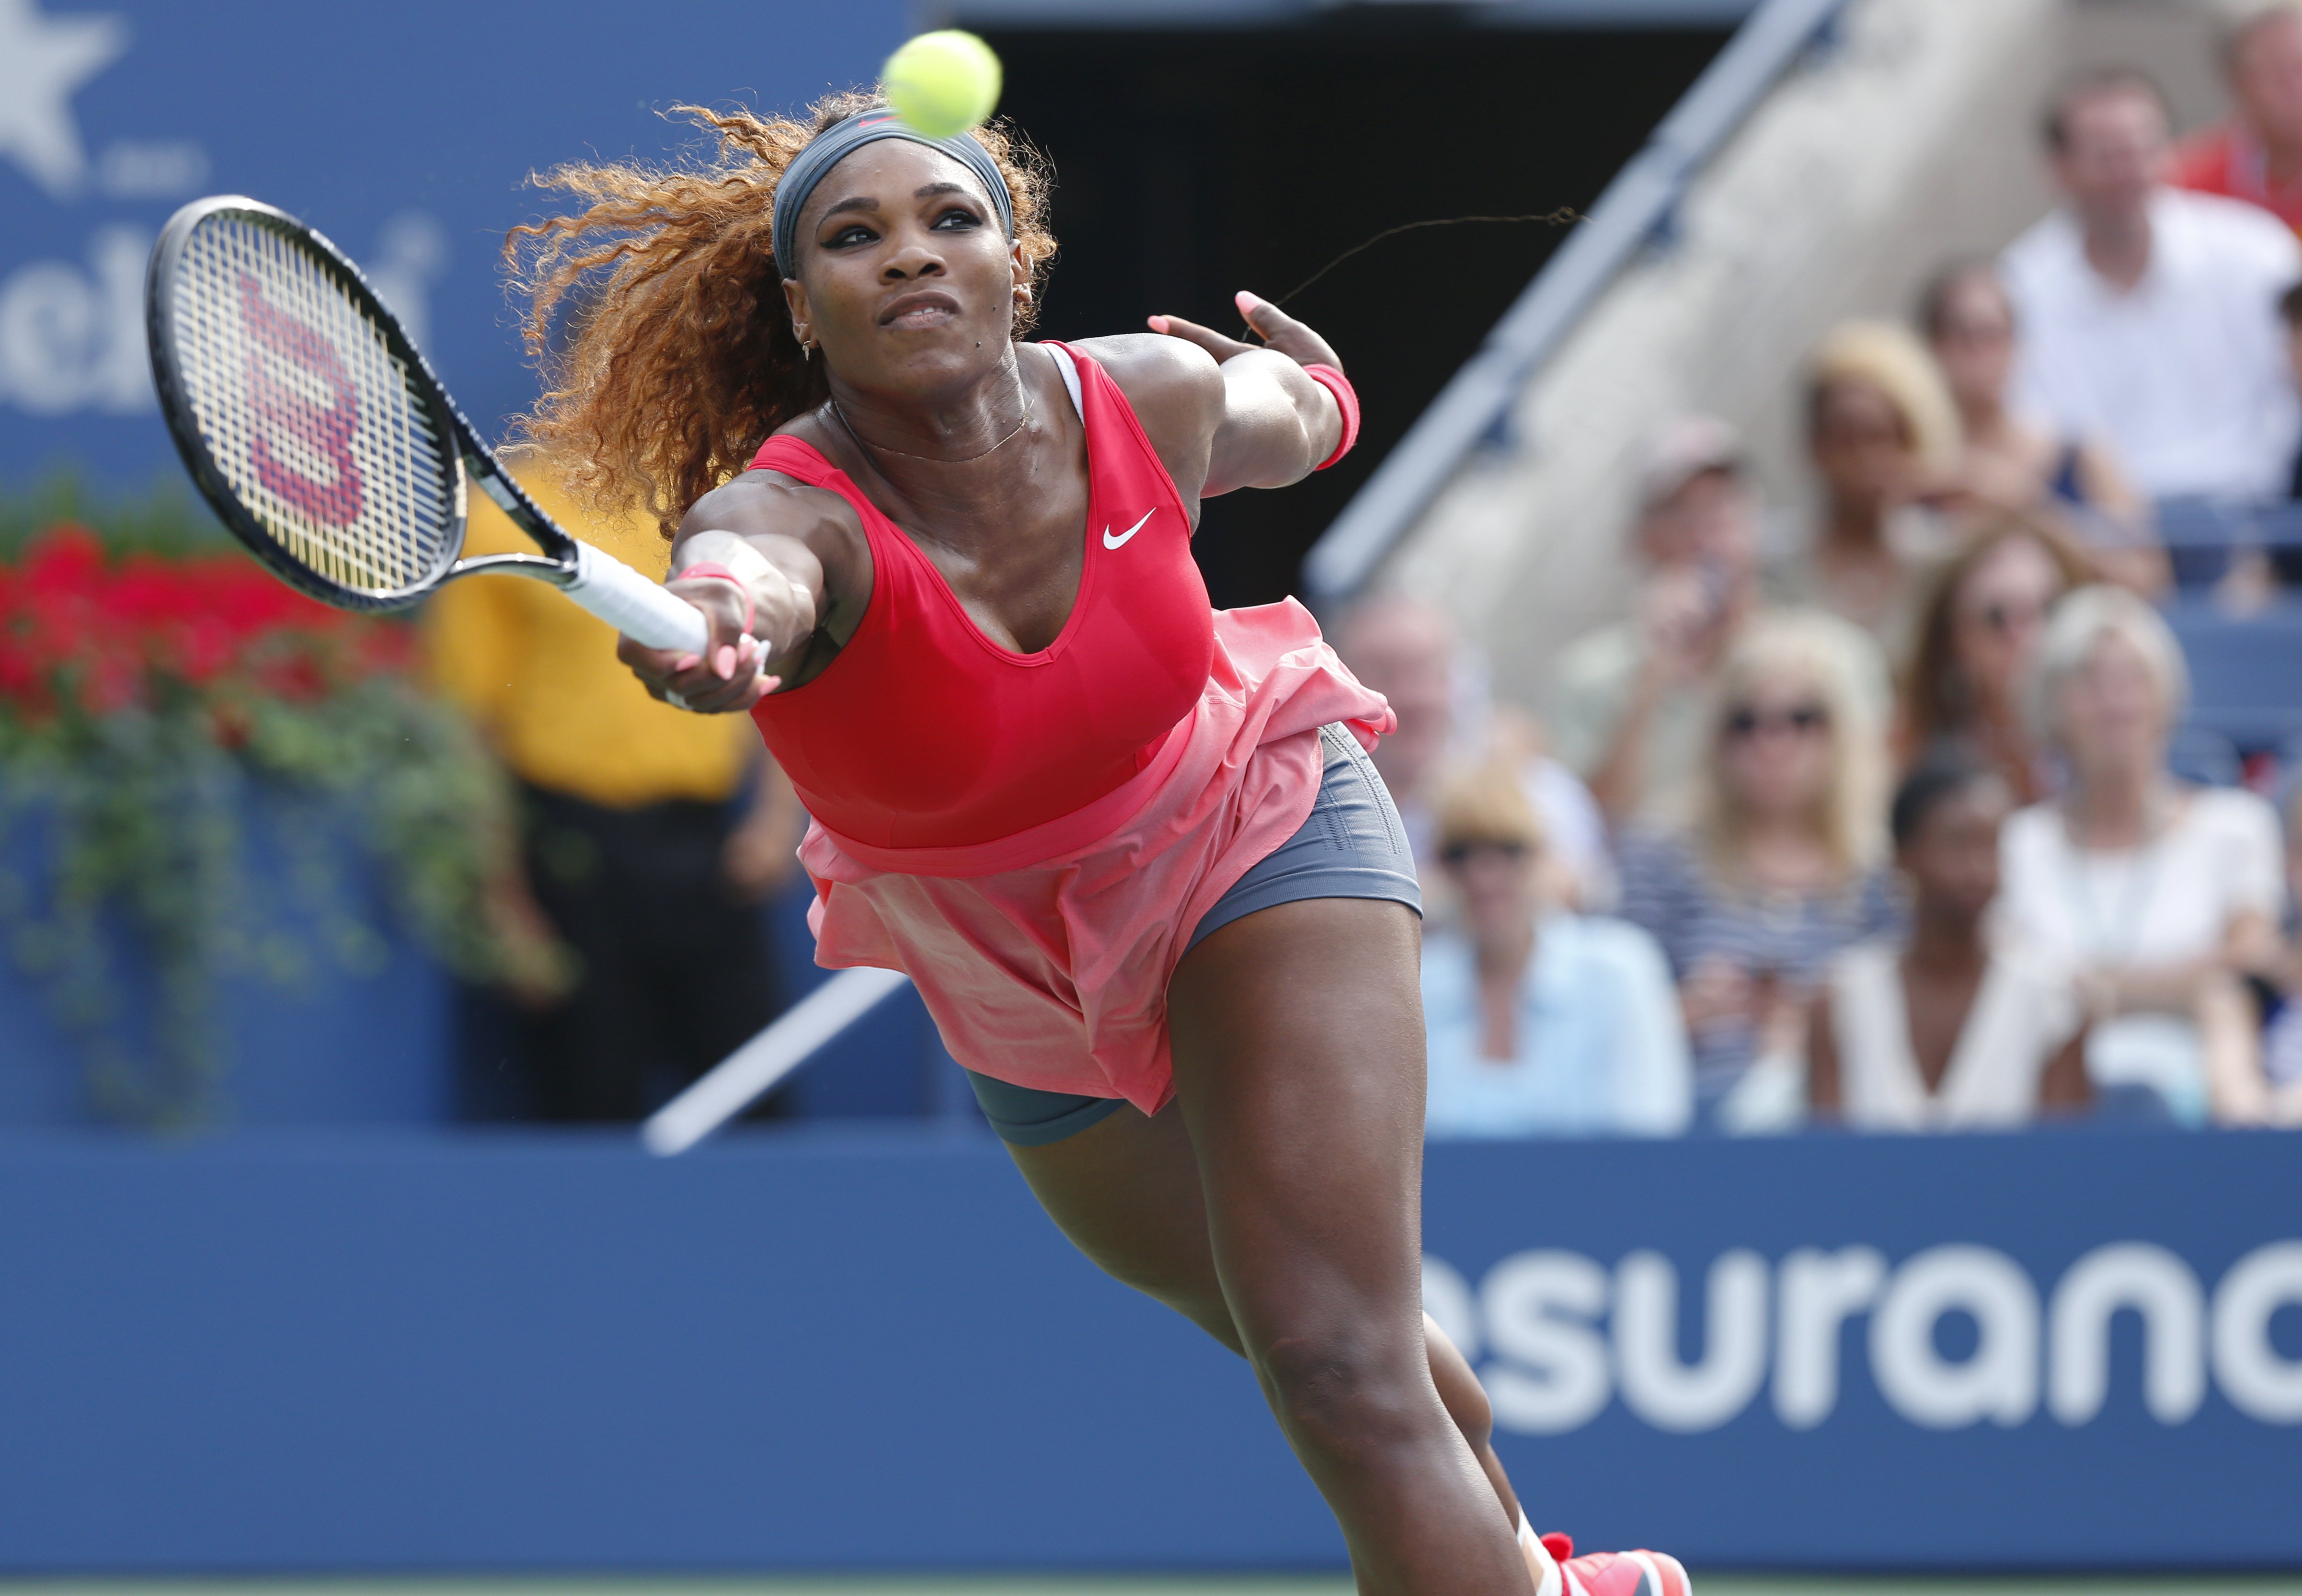 marketing and advertising market research serena williams